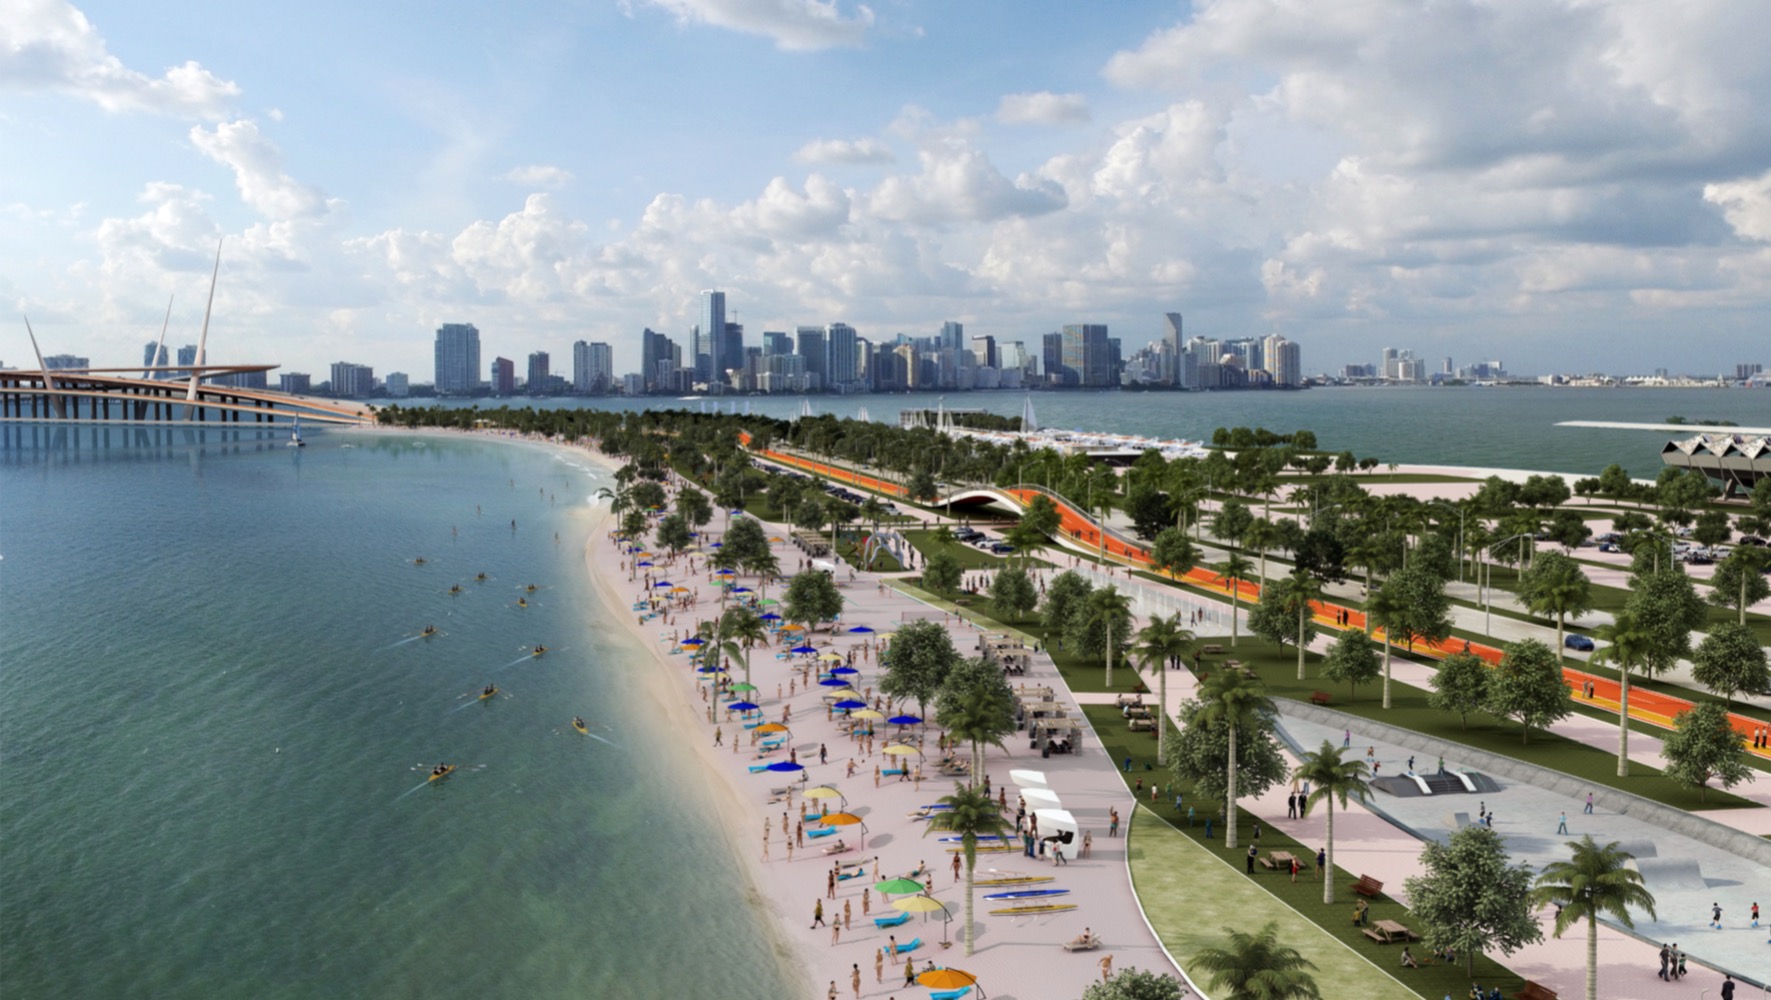 Rickenbacker Causeway Park Would String Together Miami’s Own Emerald Necklace